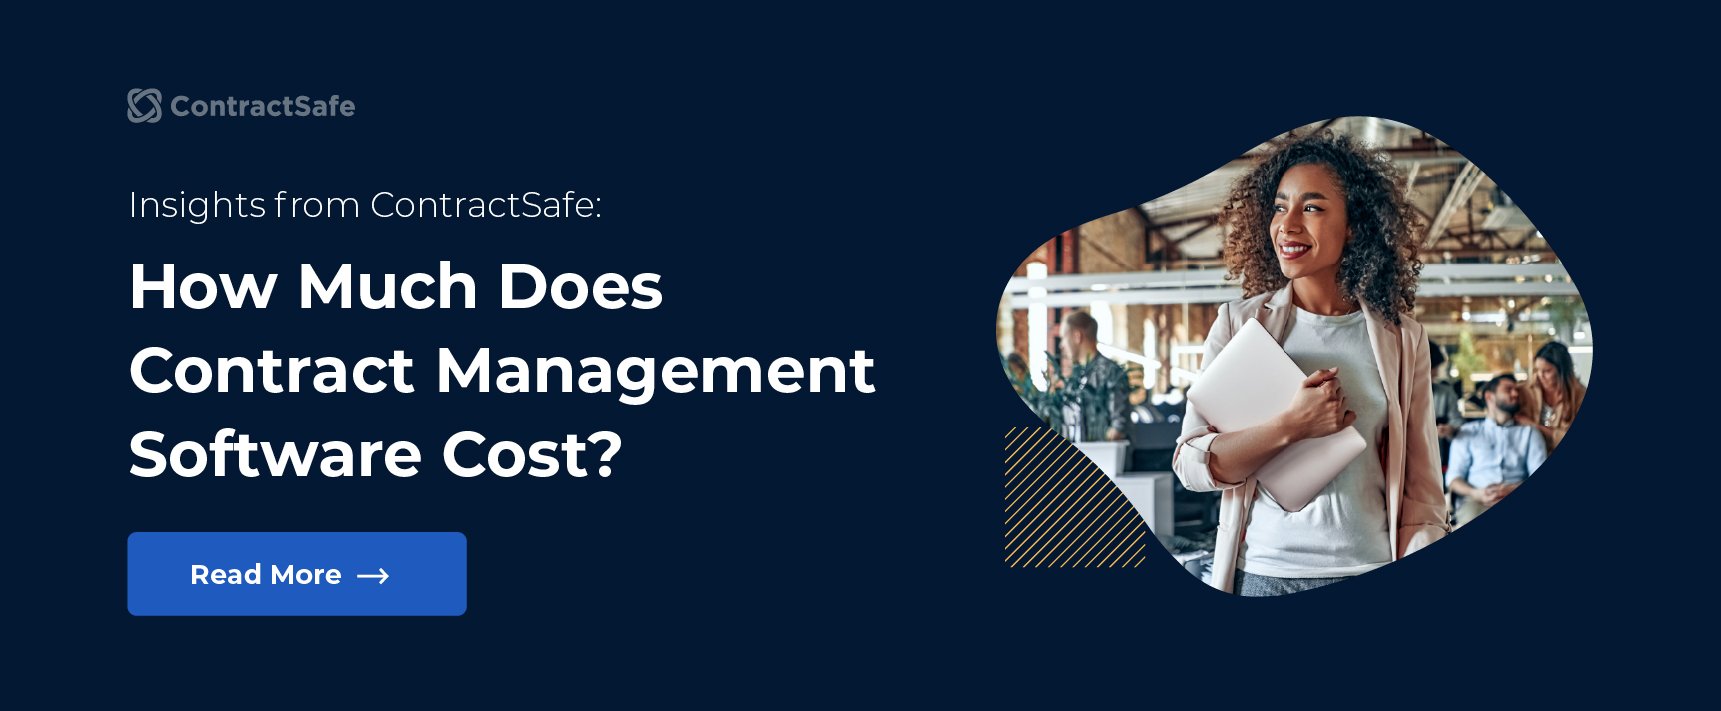 Insights from ContractSafe: How much does contract management software cost?